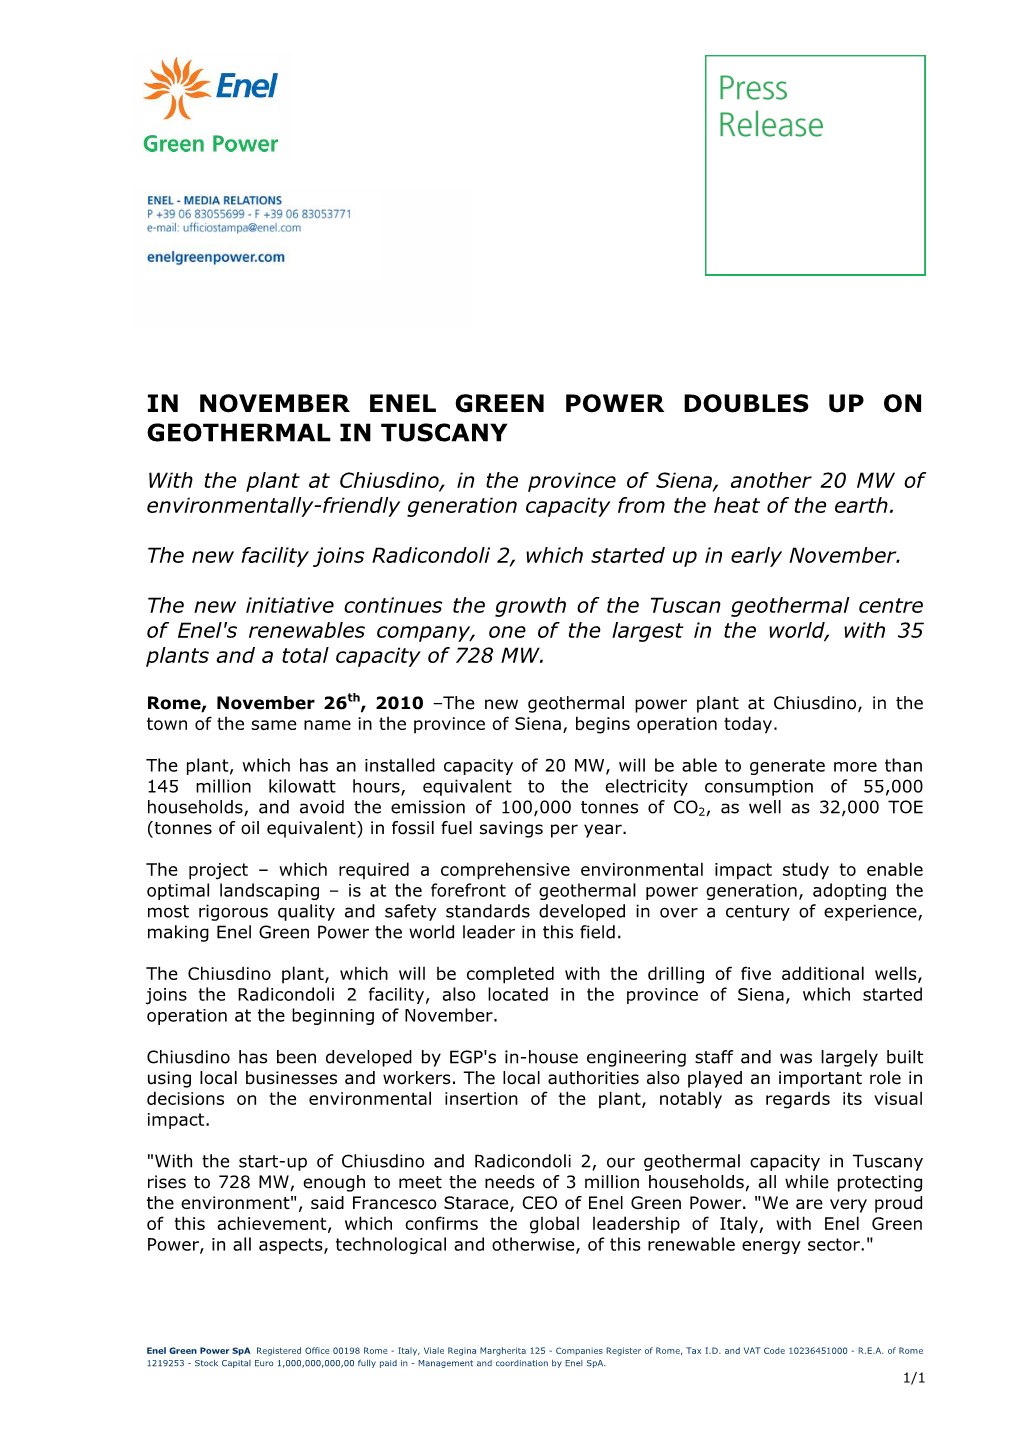 In November Enel Green Power Doubles up on Geothermal in Tuscany